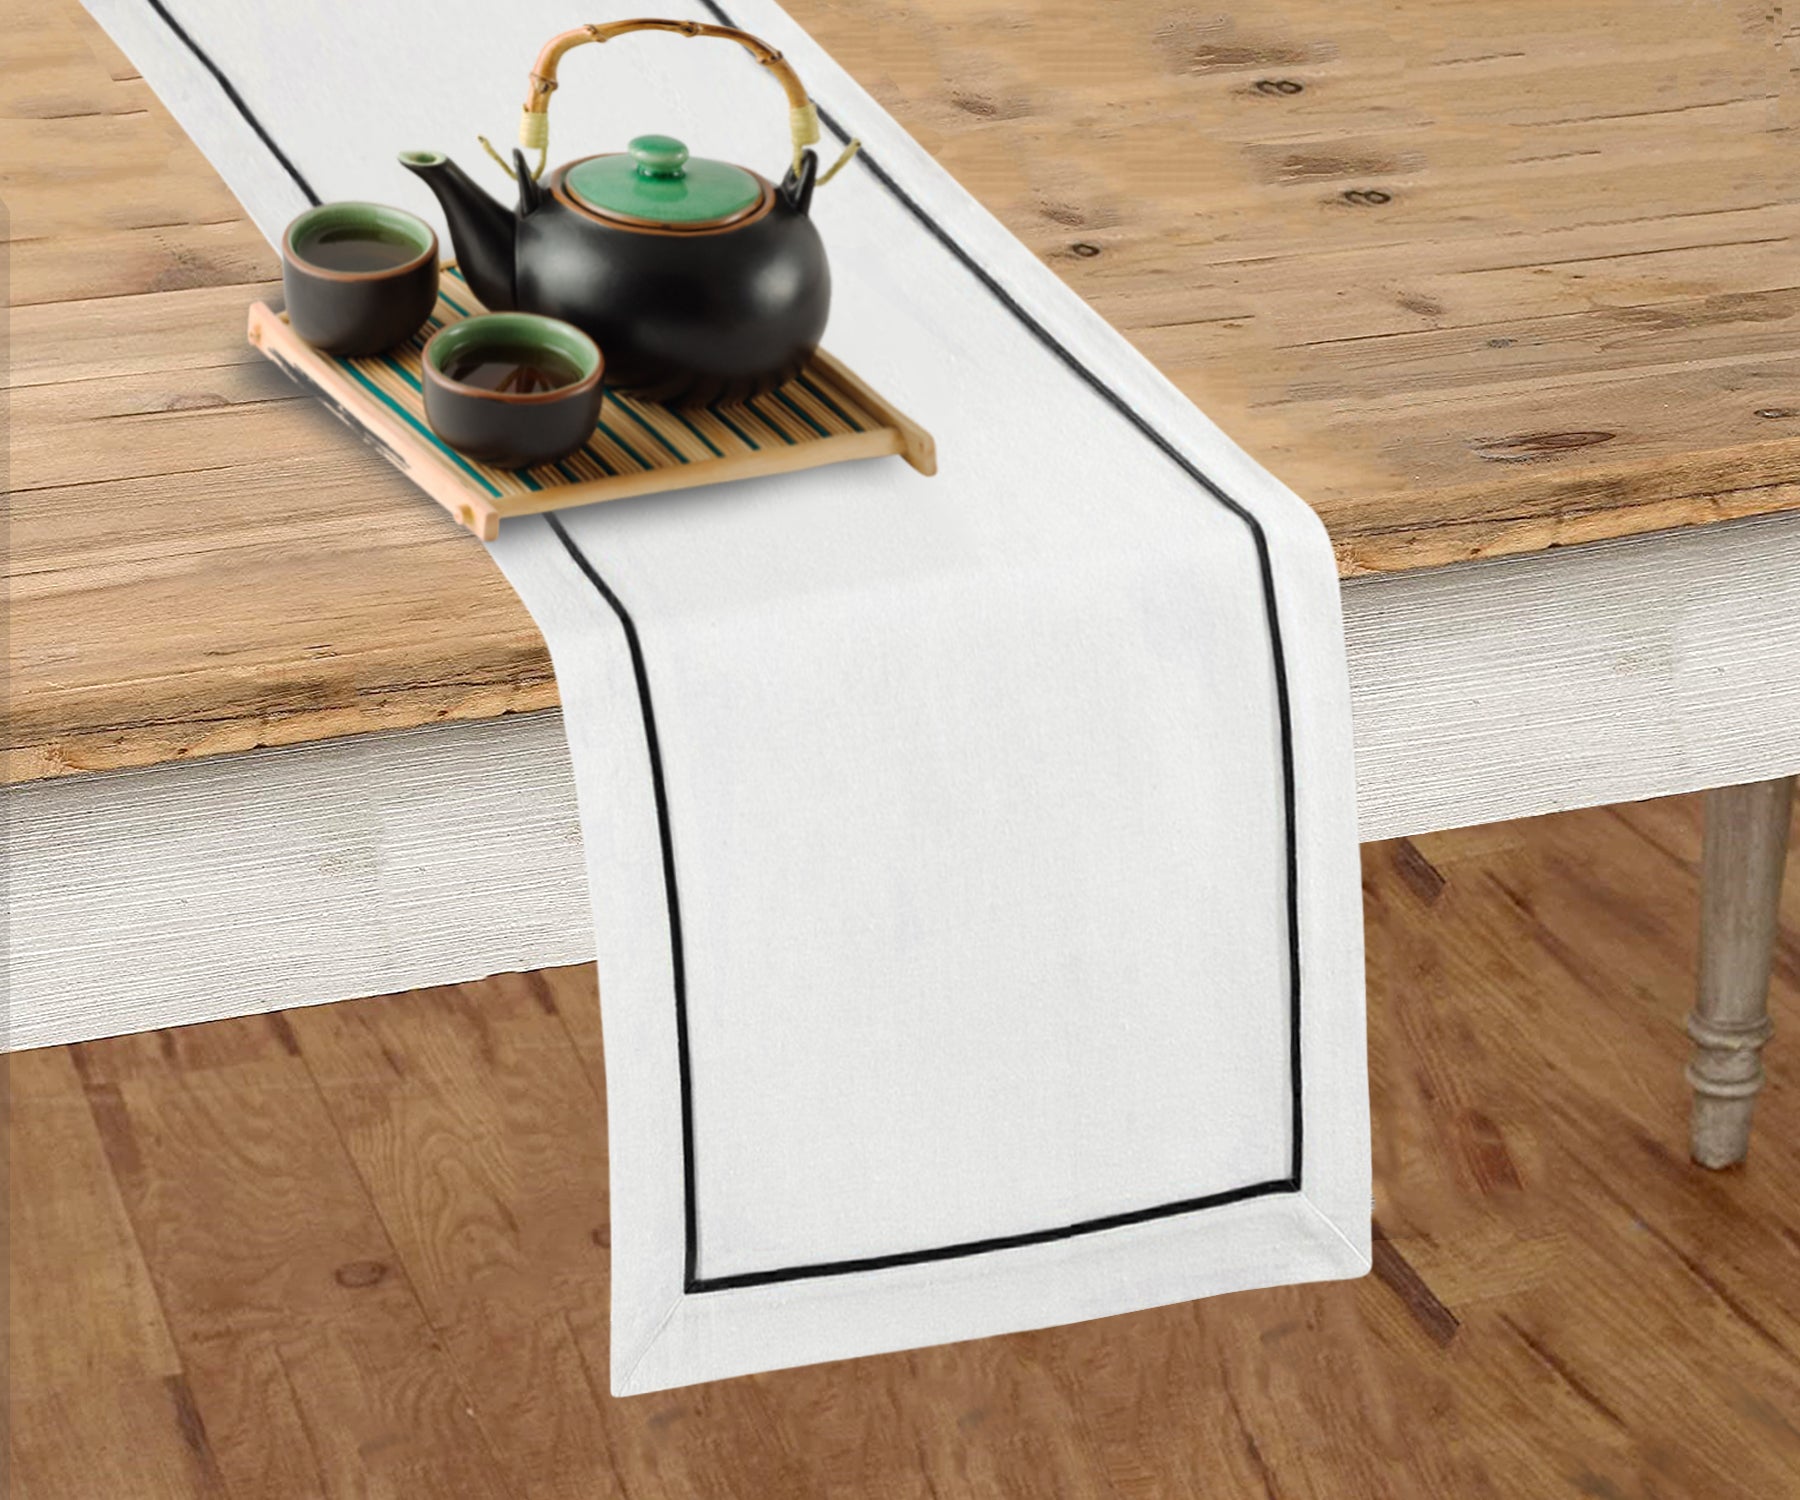 Vintage-inspired farmhouse table runner with charming details.